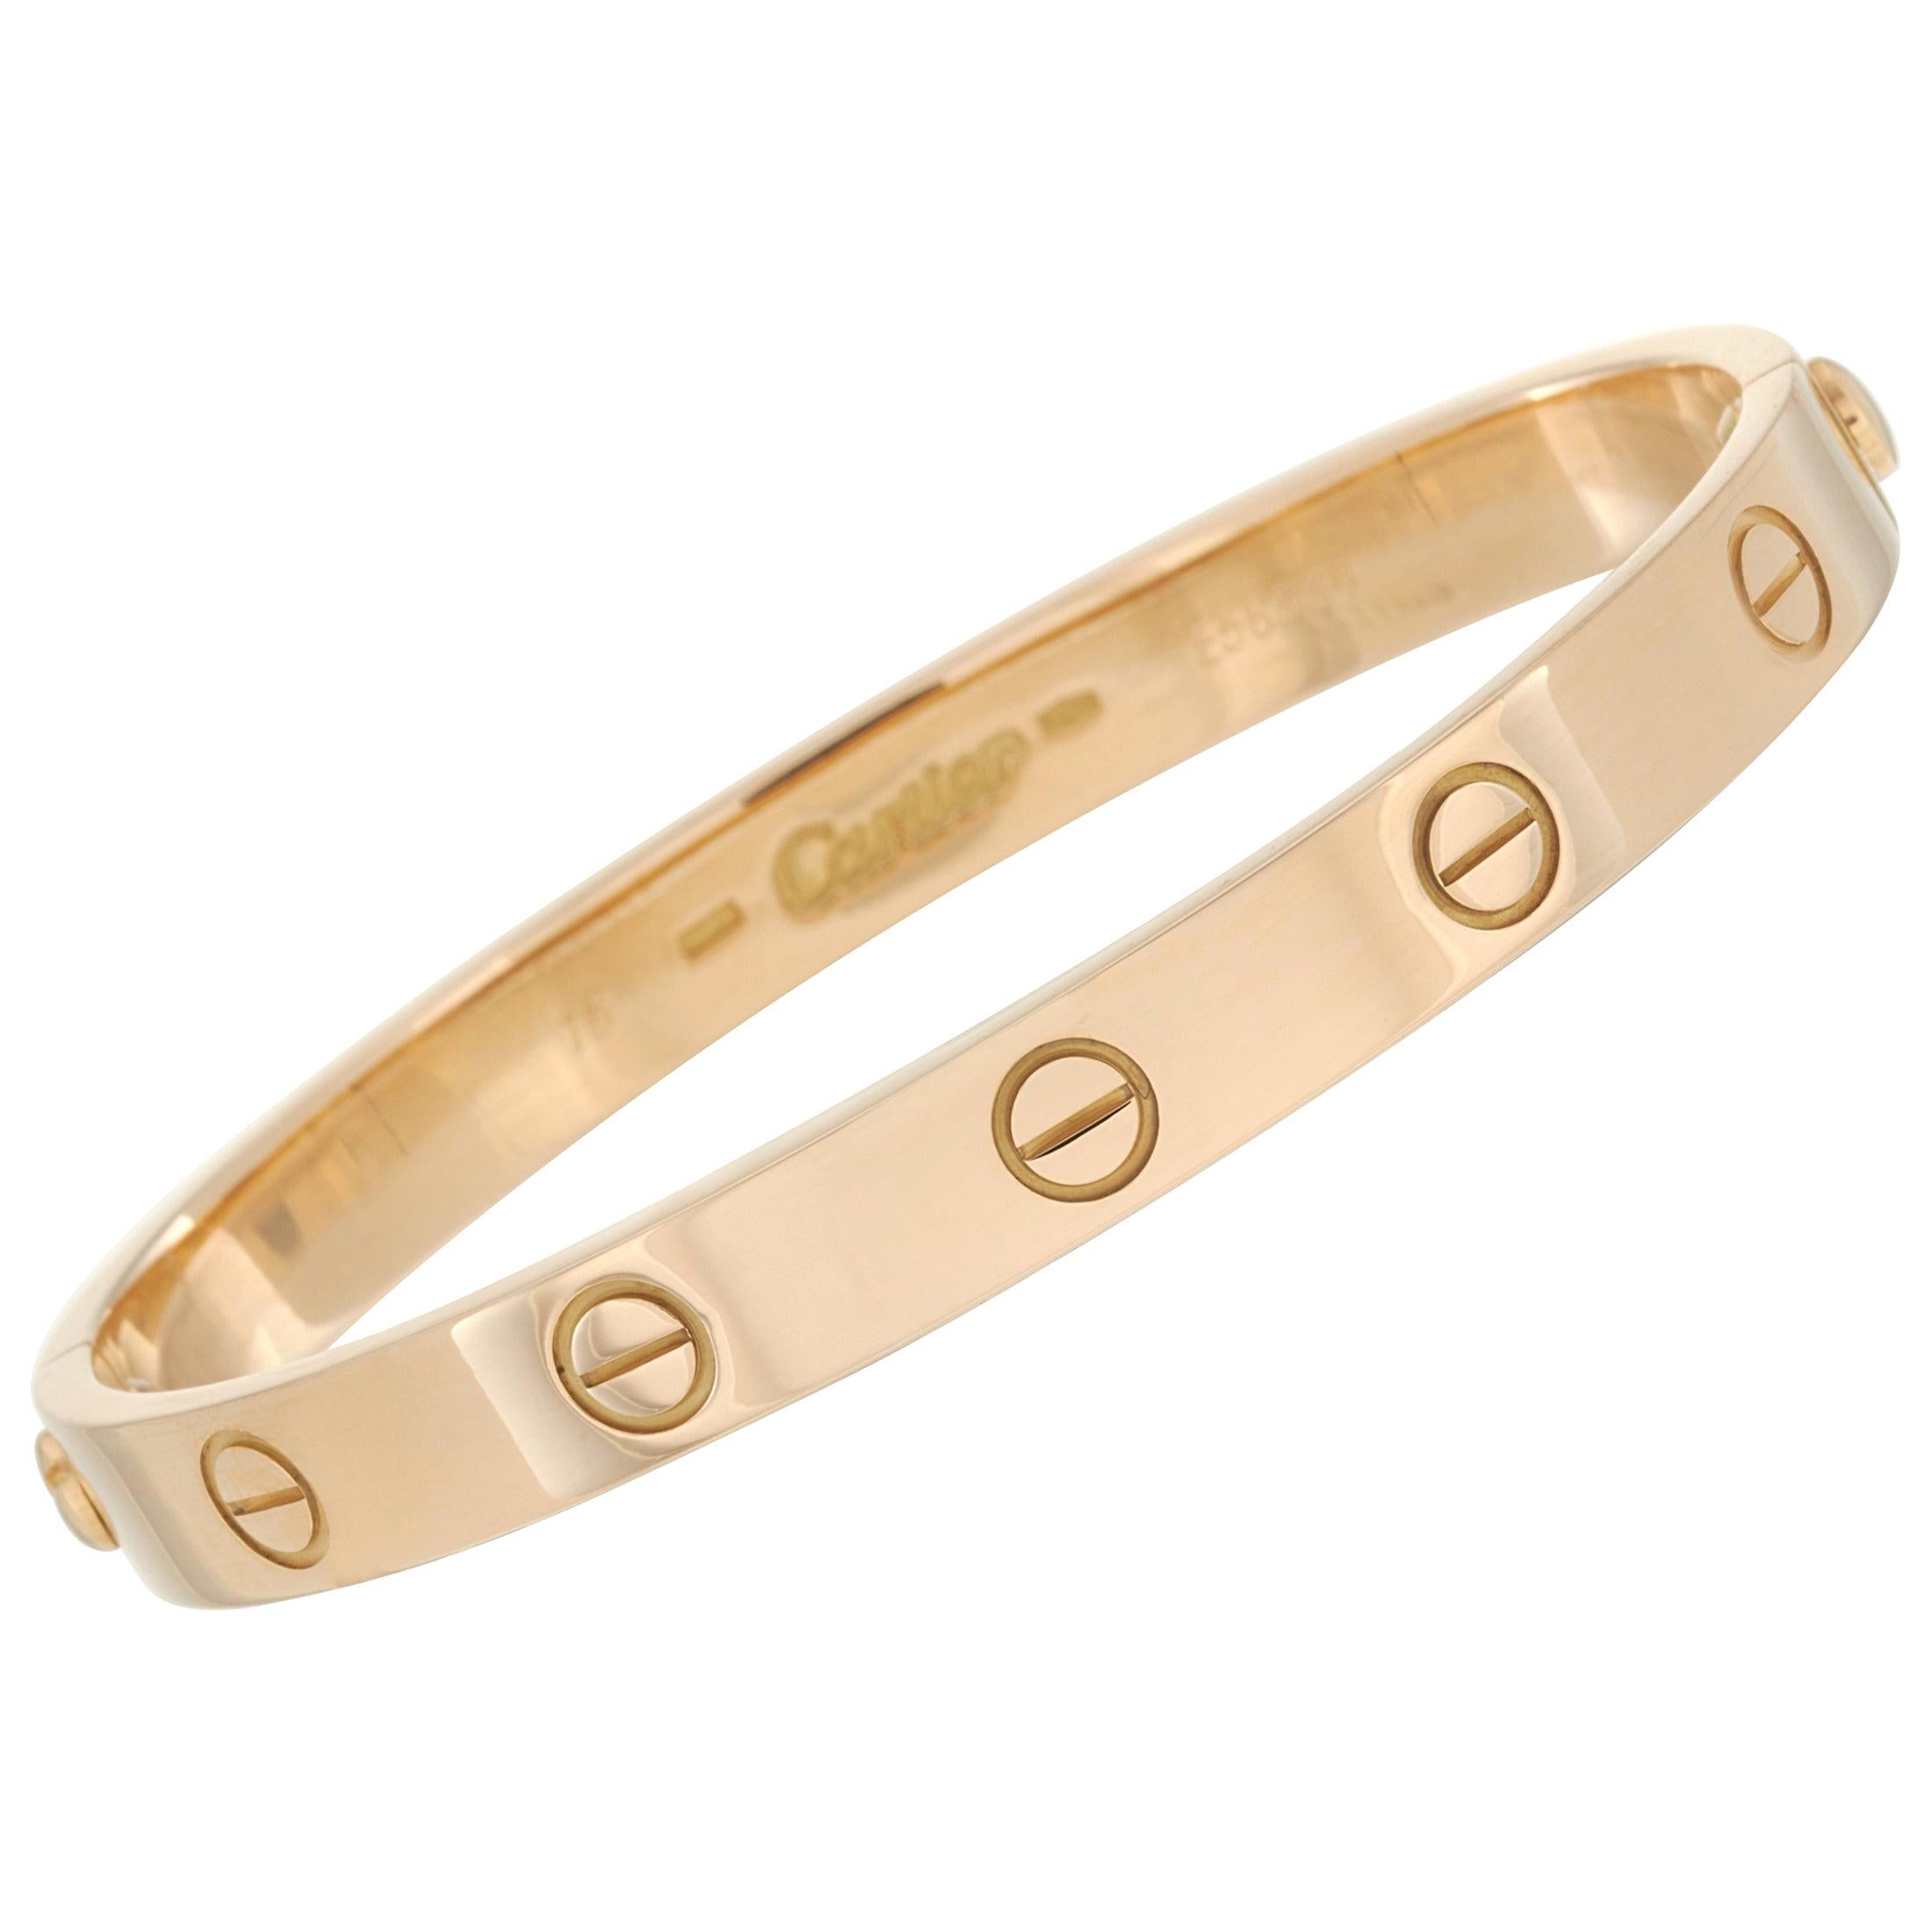 Cartier LOVE 18K Yellow Gold Bracelet with Screwdriver